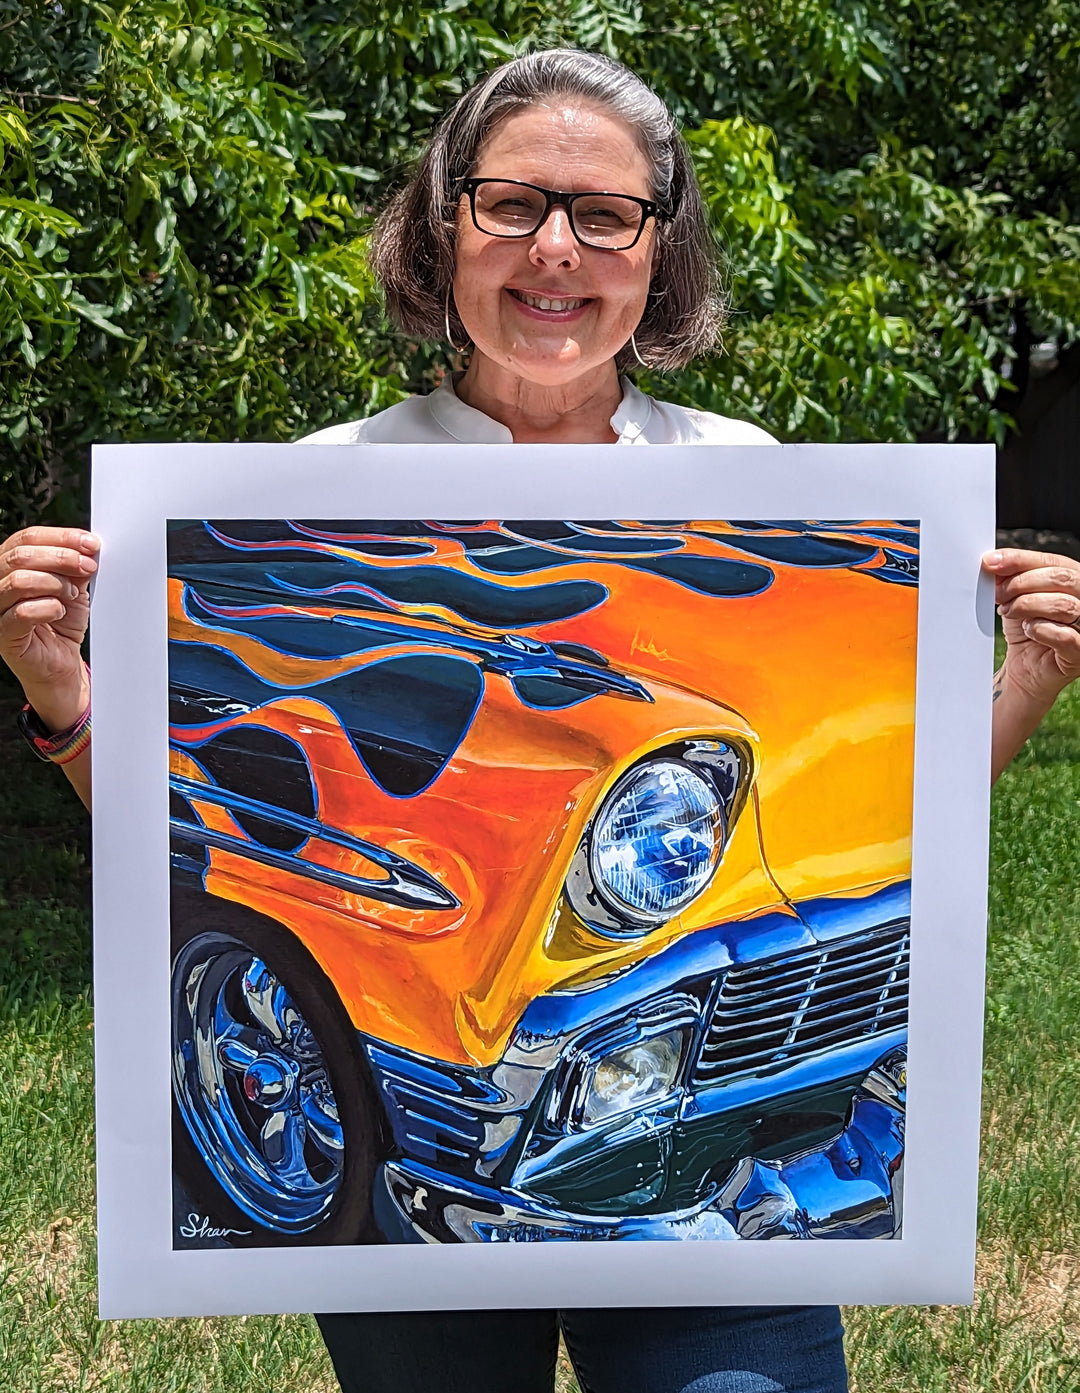 A woman holding up a painting of the "Flamin’ Chevrolet Bel Air" by Shan Fannin, measuring 28 x 28".